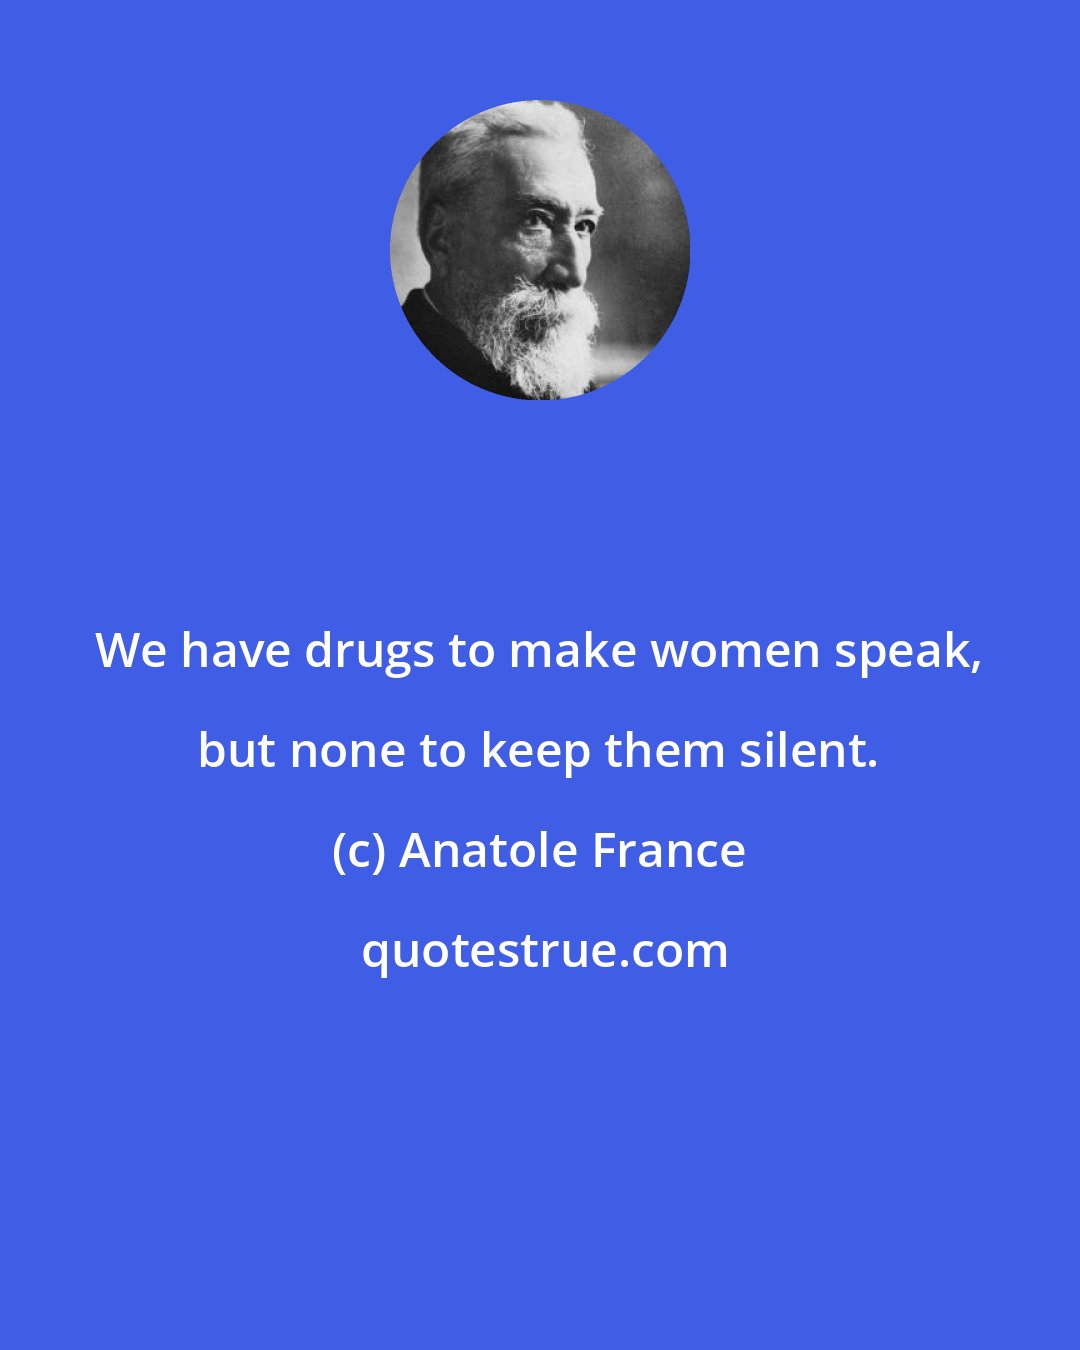 Anatole France: We have drugs to make women speak, but none to keep them silent.